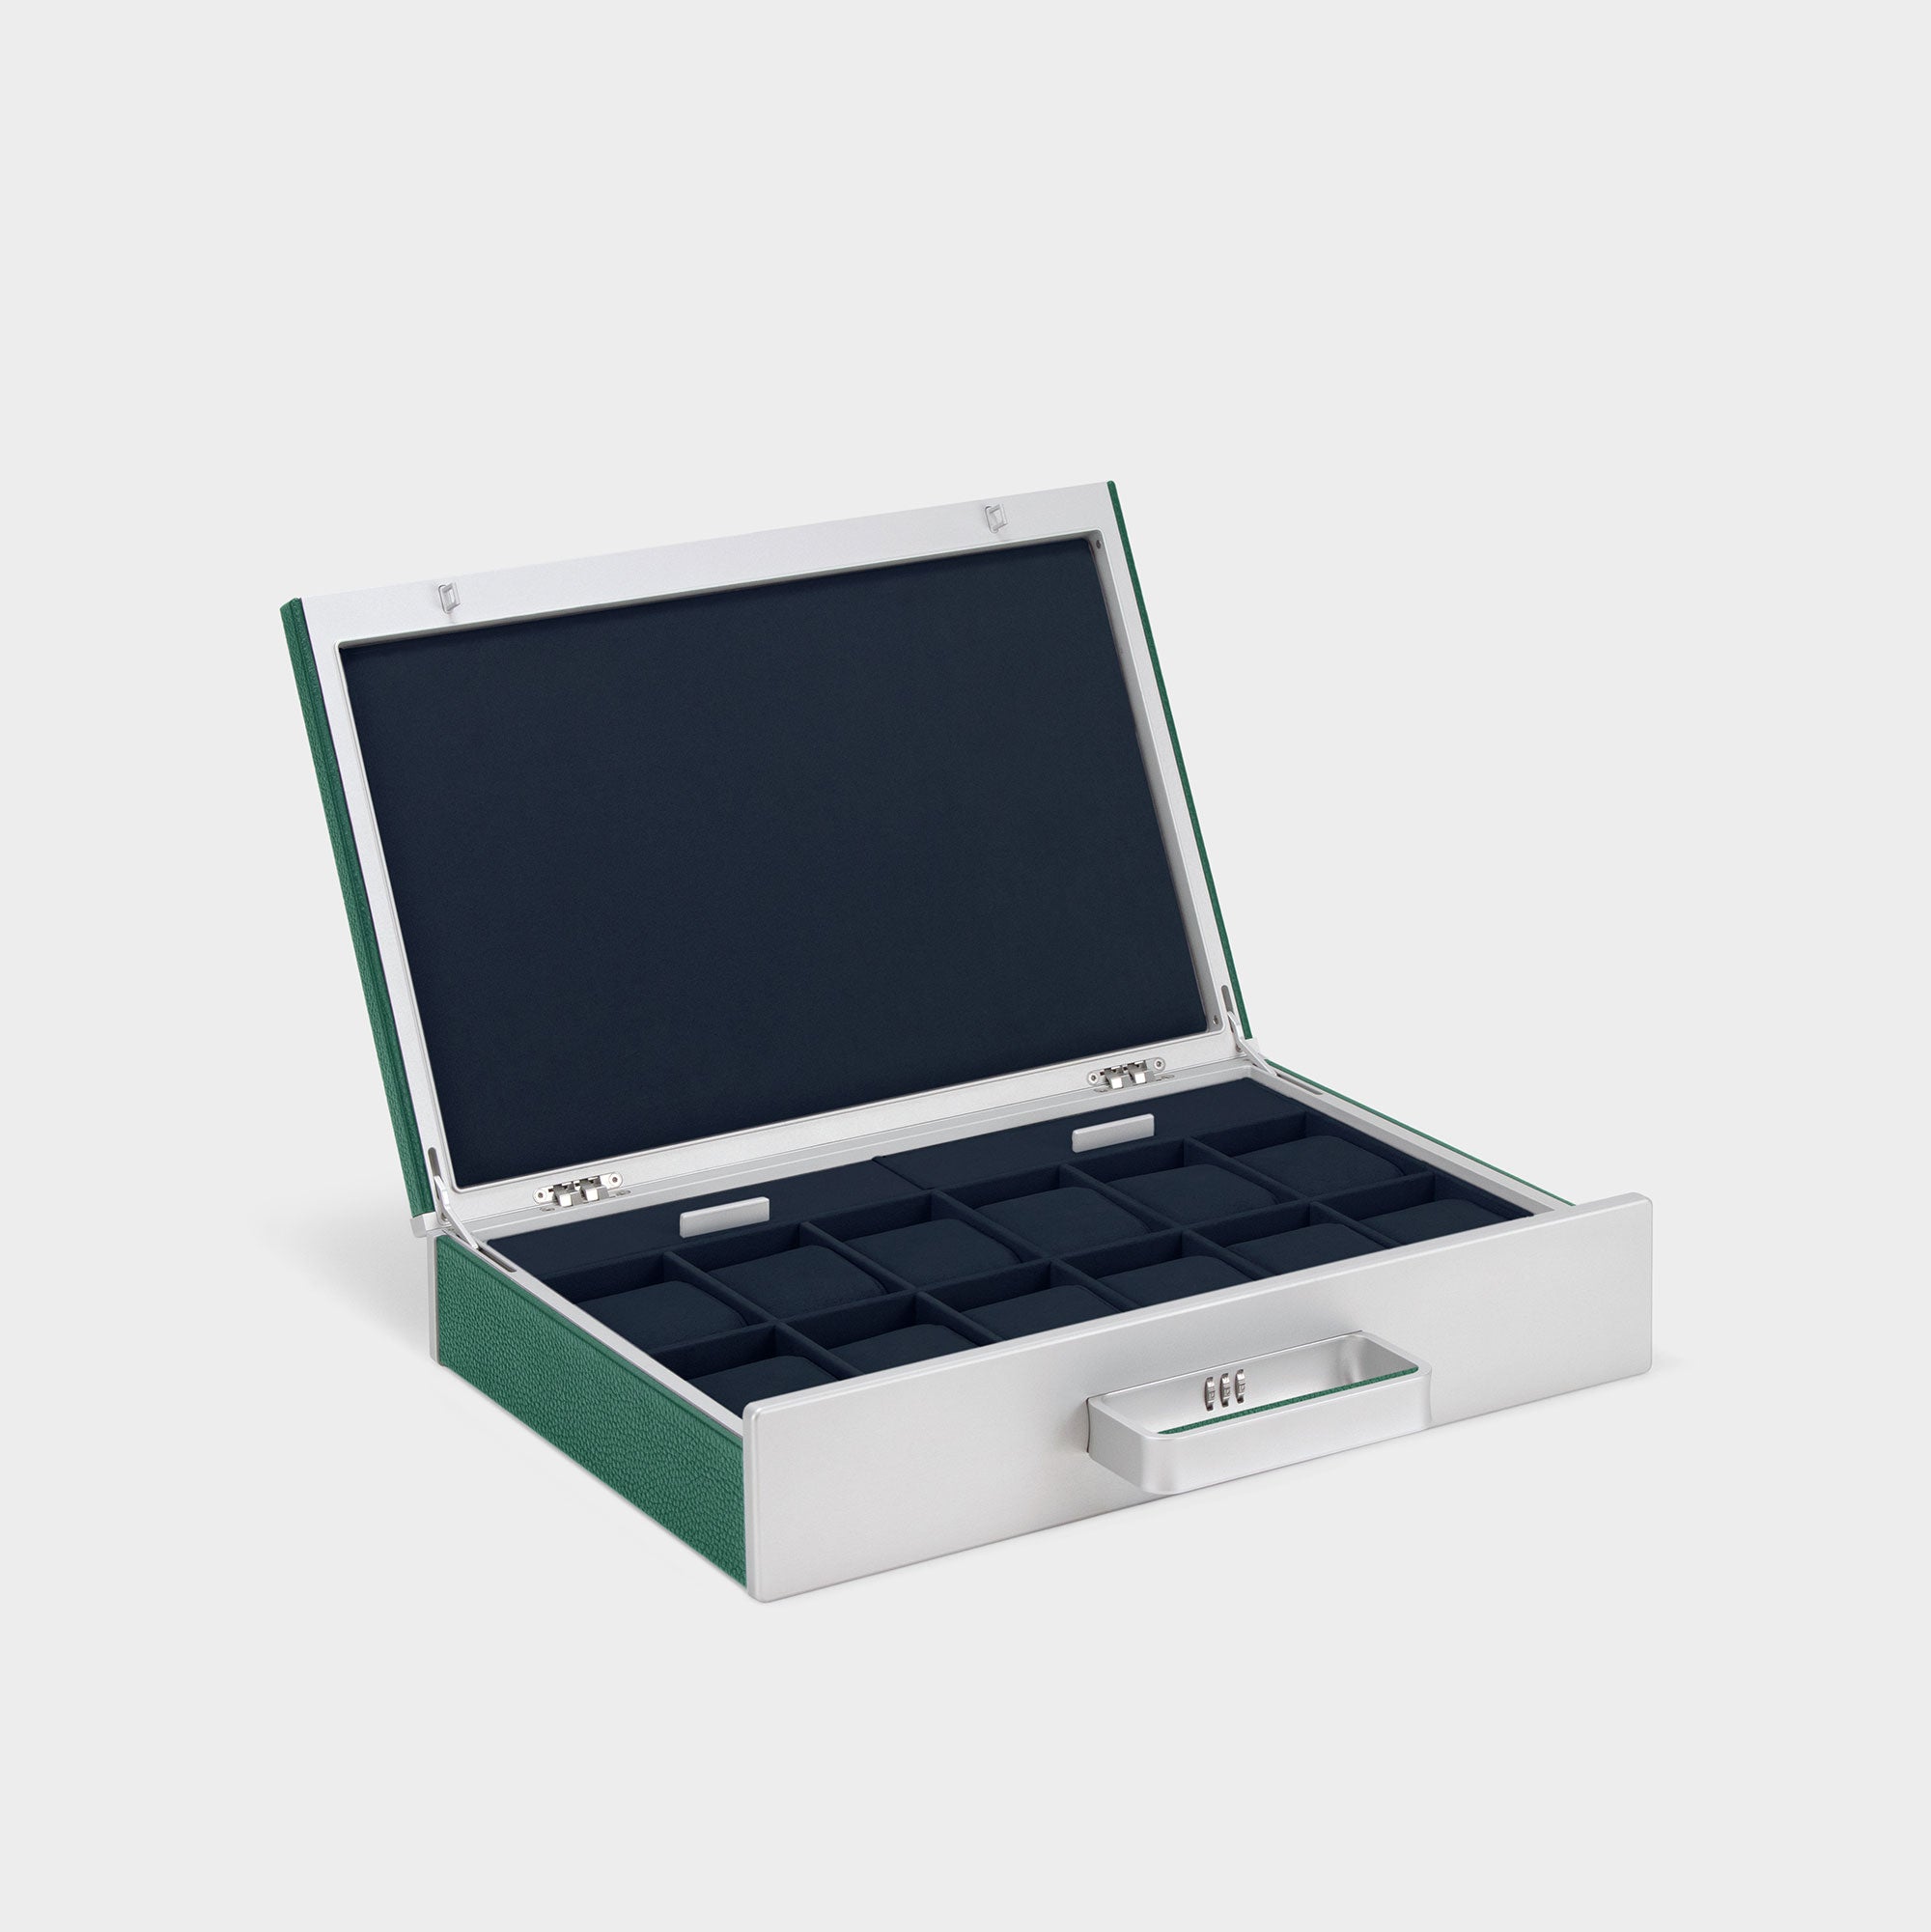 Handmade watch briefcase for up to 12 watches in emerald leather and deep blue Alcantara interior